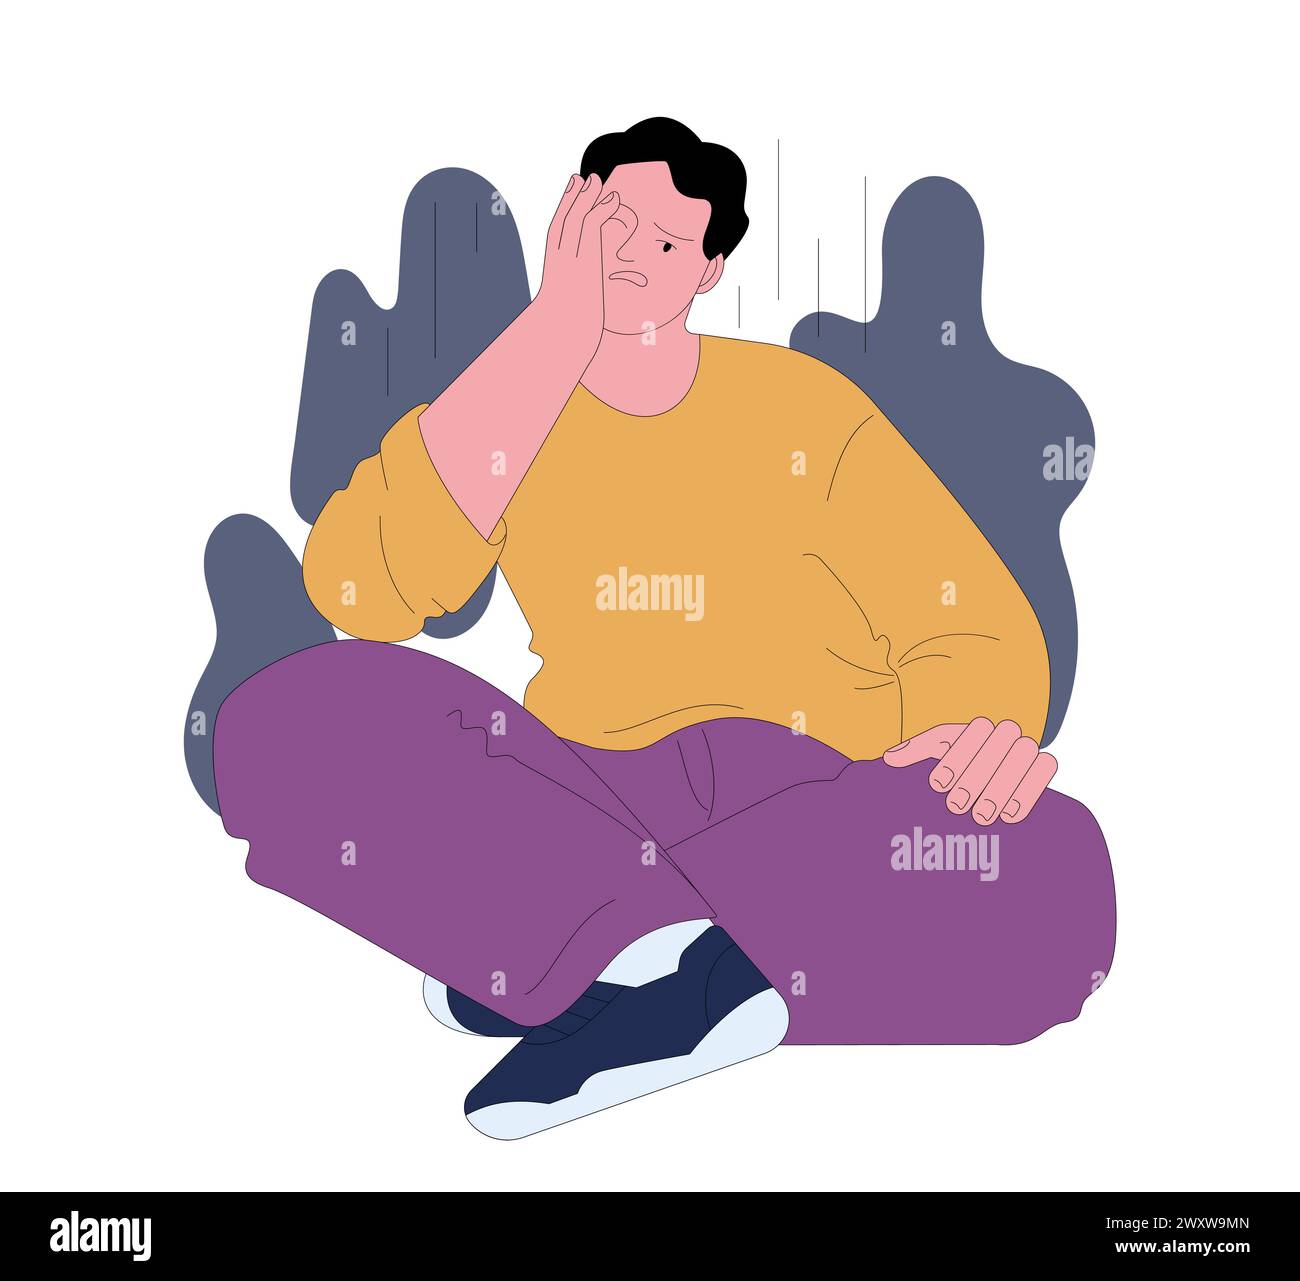 Fear of boredom. Disenchanted bored young man encapsulating the emotional and existential dread of monotony and dullness. Flat vector illustration Stock Vector